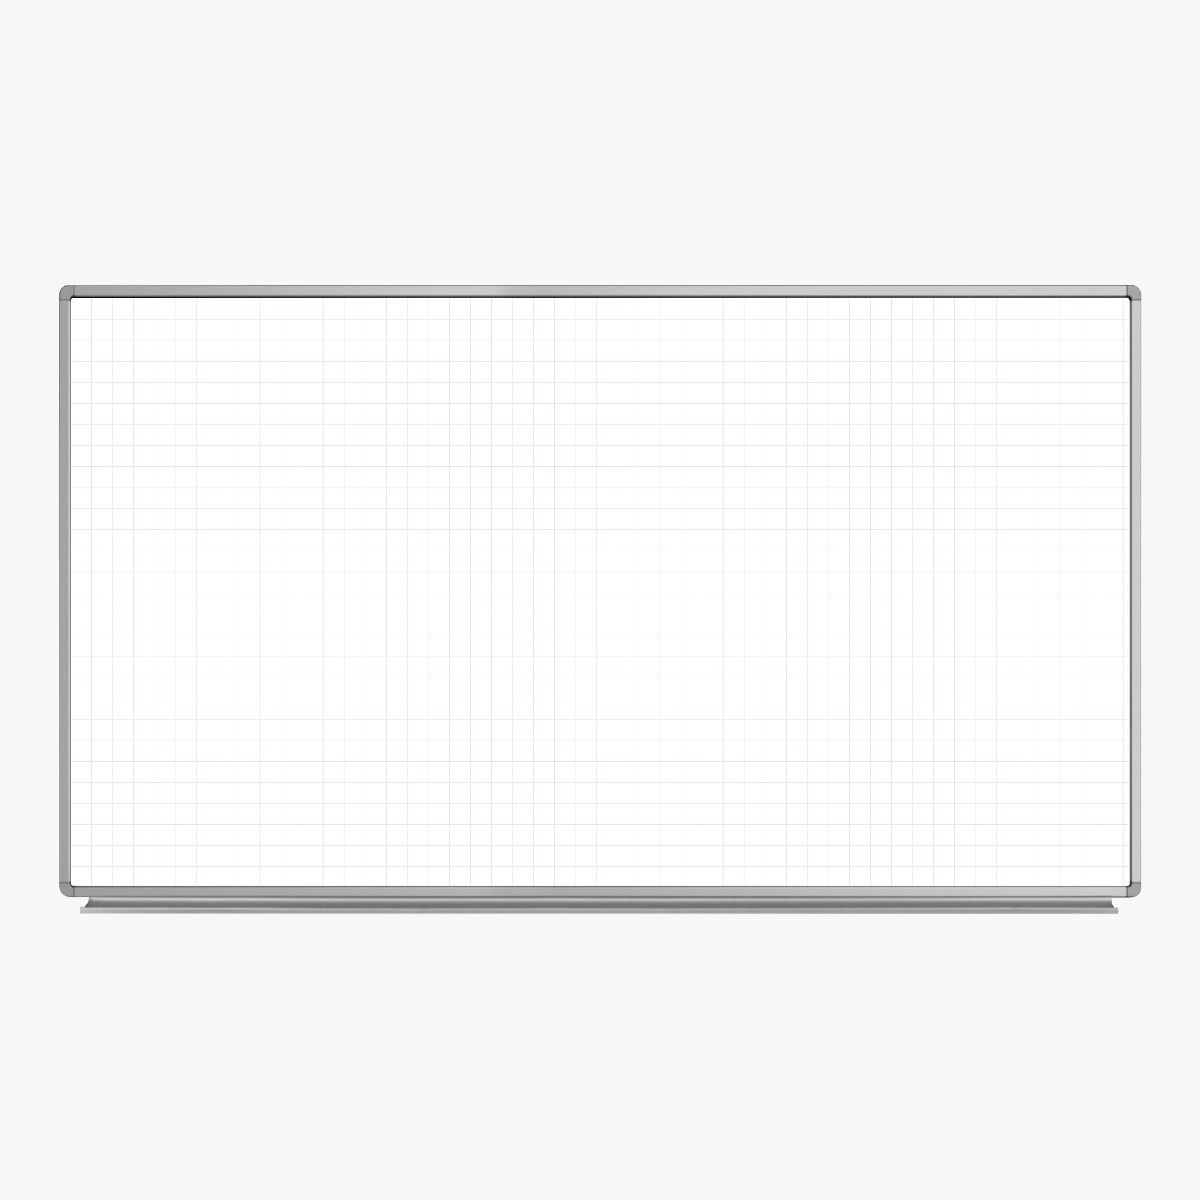 Picture of Luxor WB7240LB 72 x 40 in. Wall Mounted Magnetic Ghost Grid Whiteboard